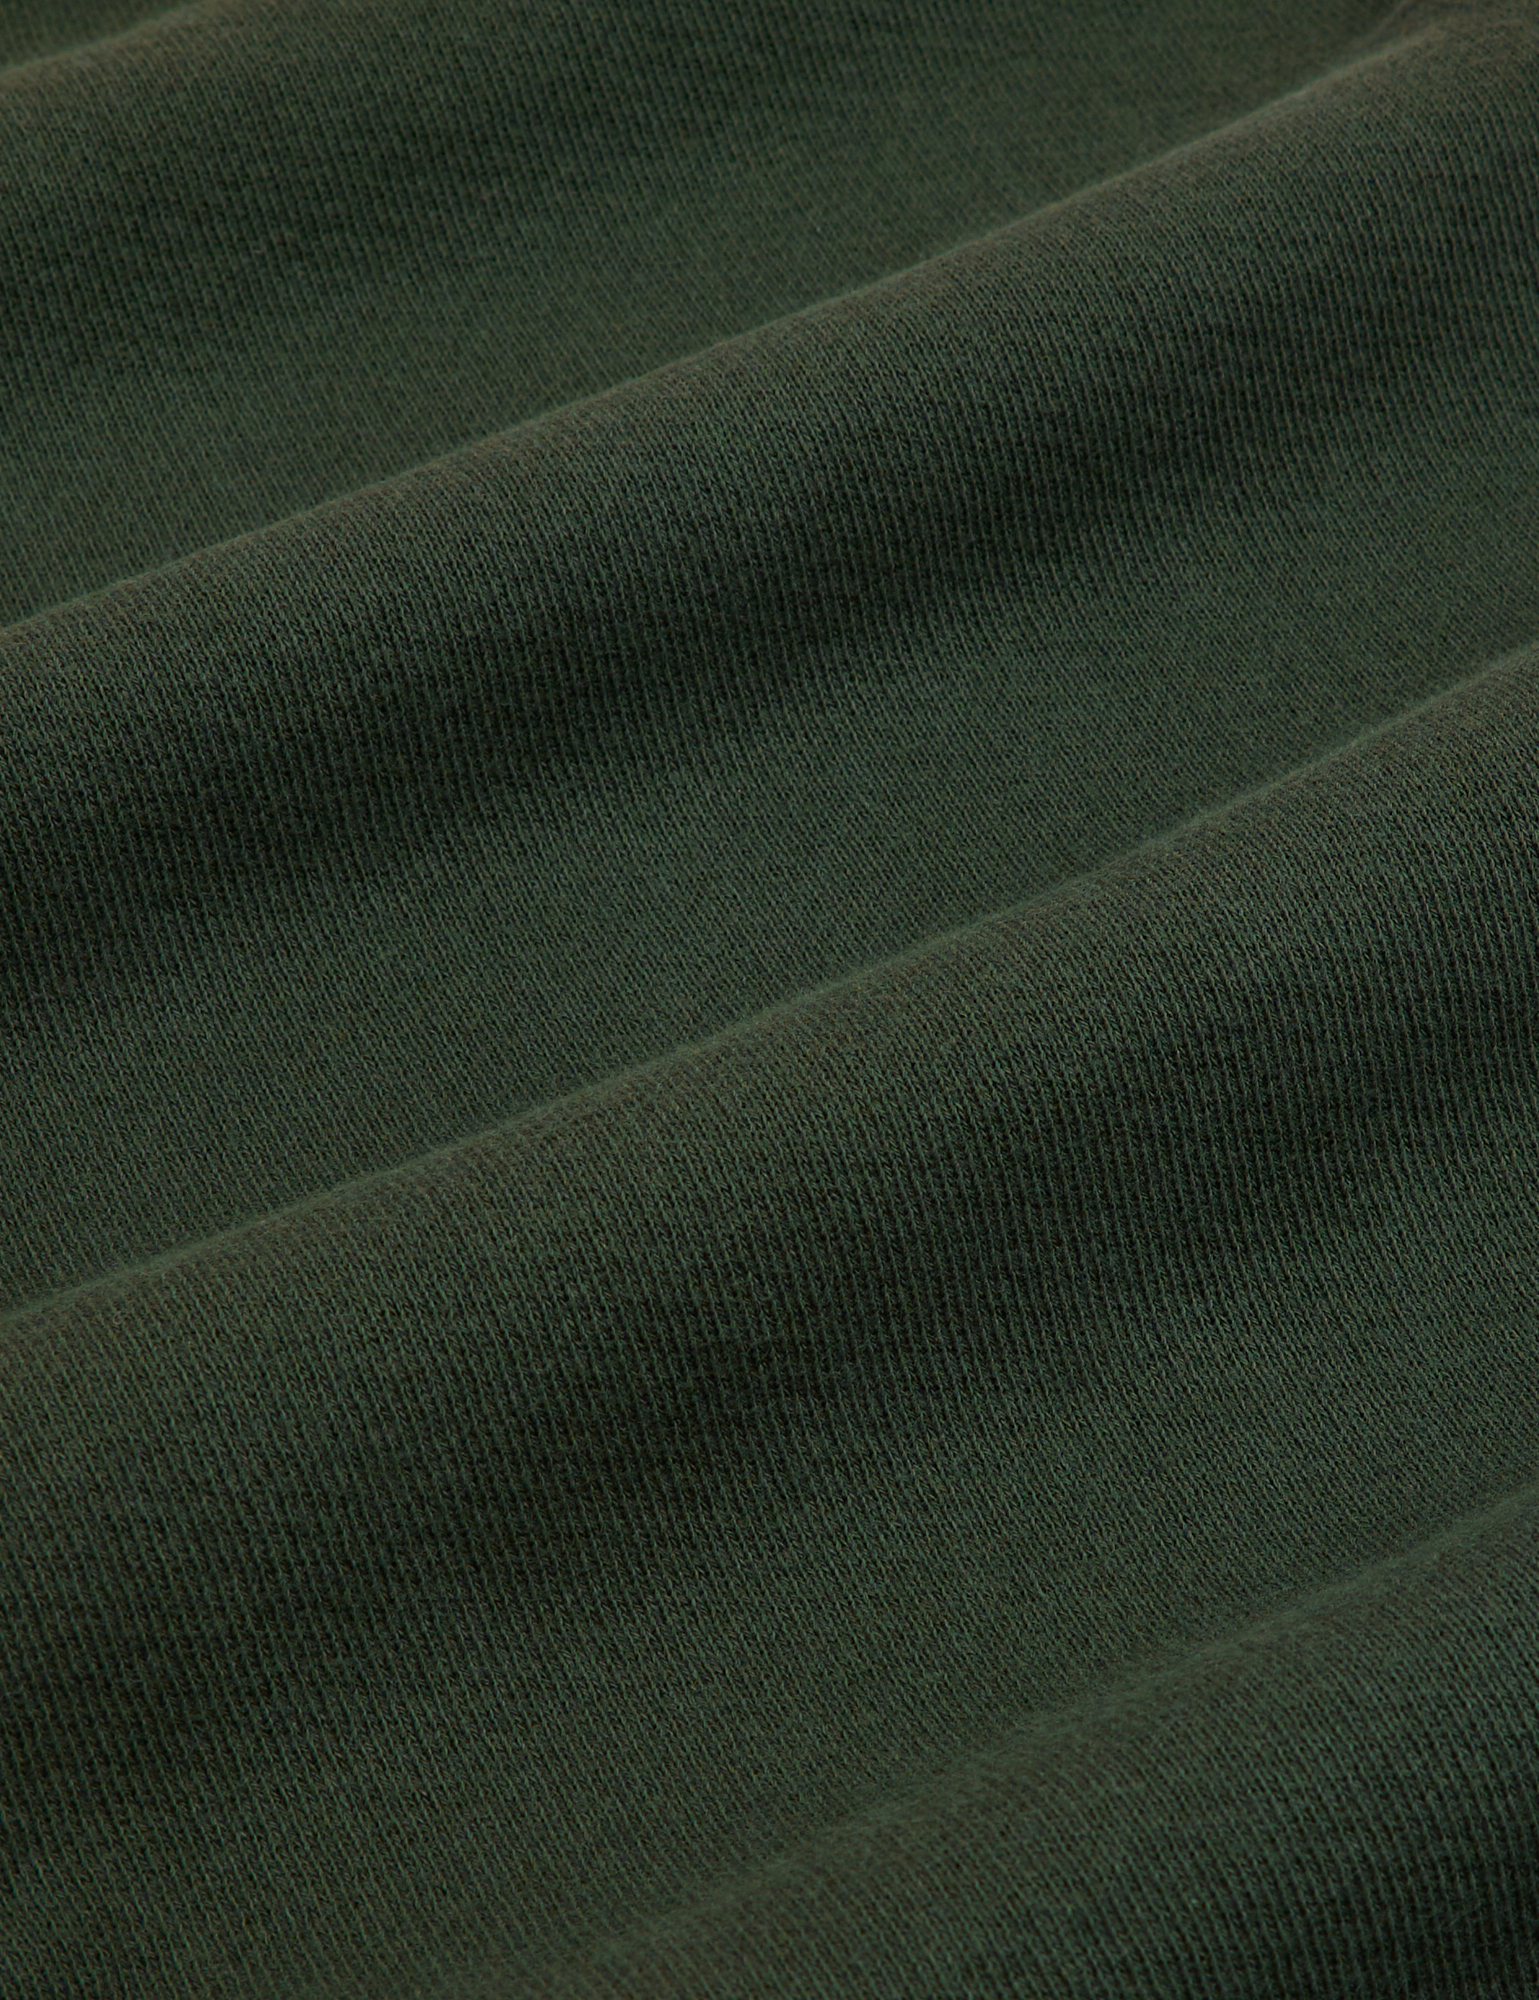 Rolled Cuff Sweat Pants in Swamp Green fabric detail close up